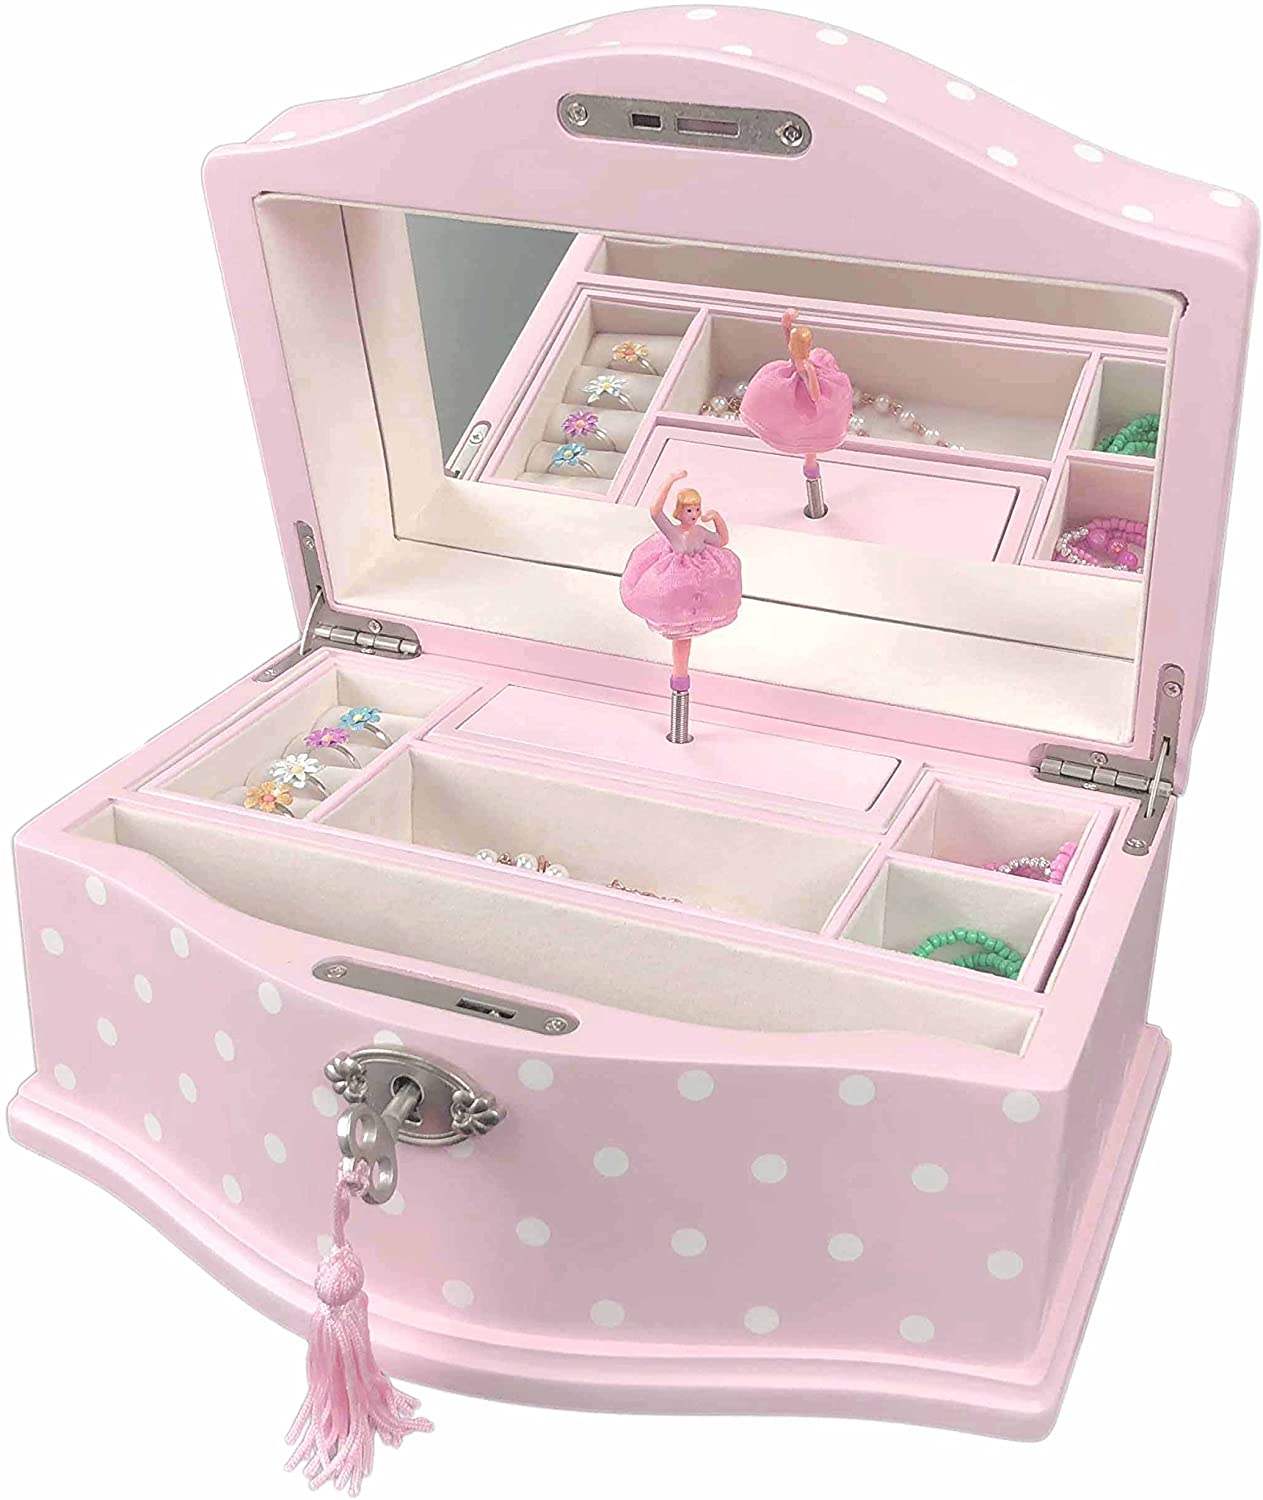 Art Lins Elle Ballerina Music Jewelry Box with Lock, Girl's Box, Wind Up Music Wooden Case, Large (Pink) - Walmart.com